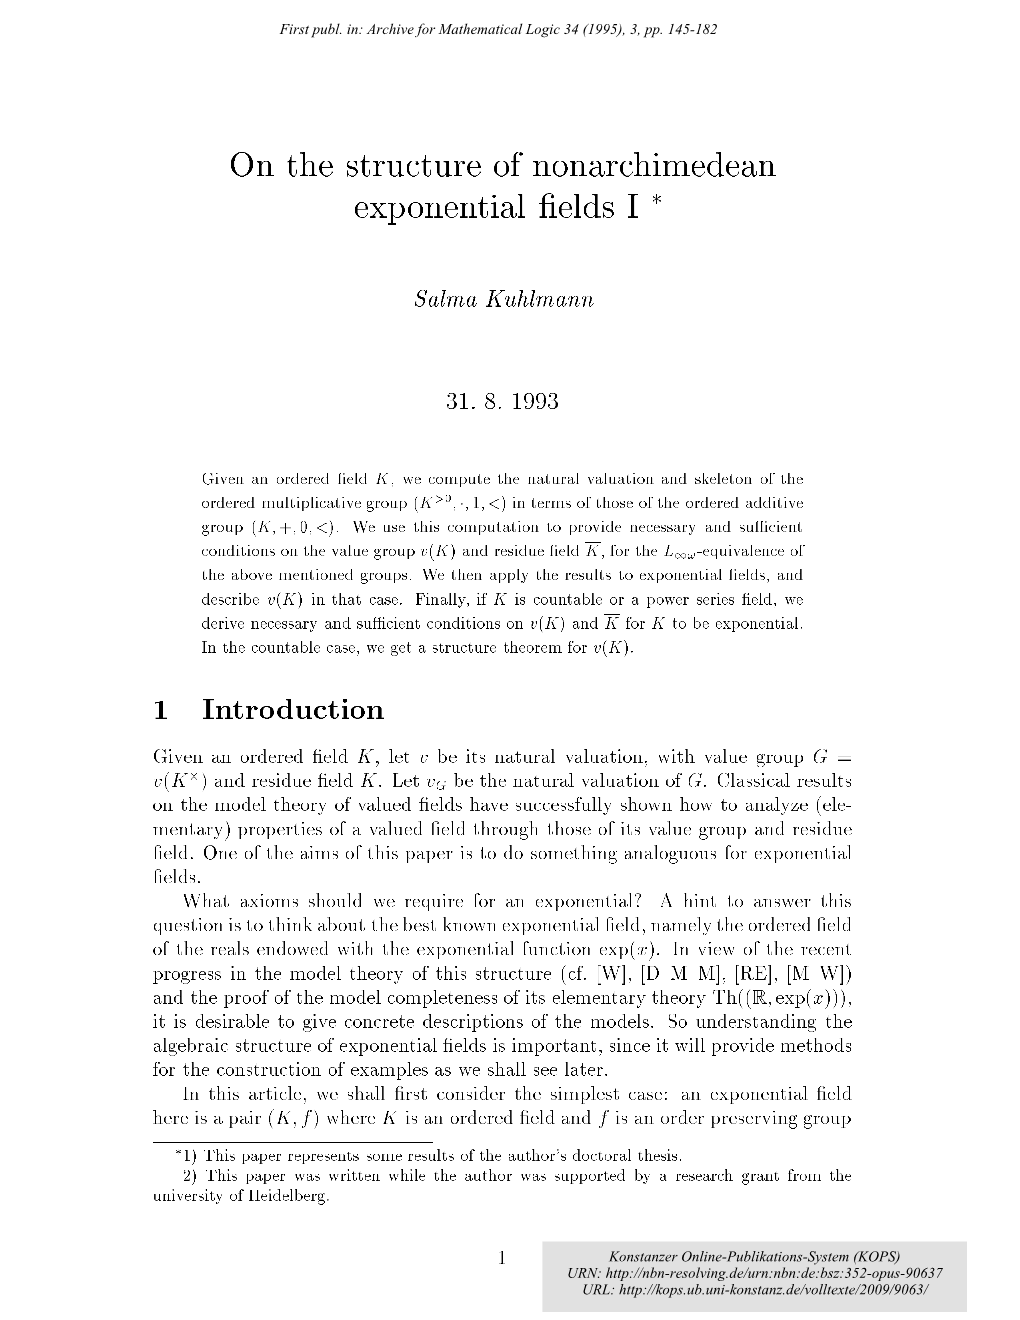 On the Structure of Nonarchimedean Exponential Fields I